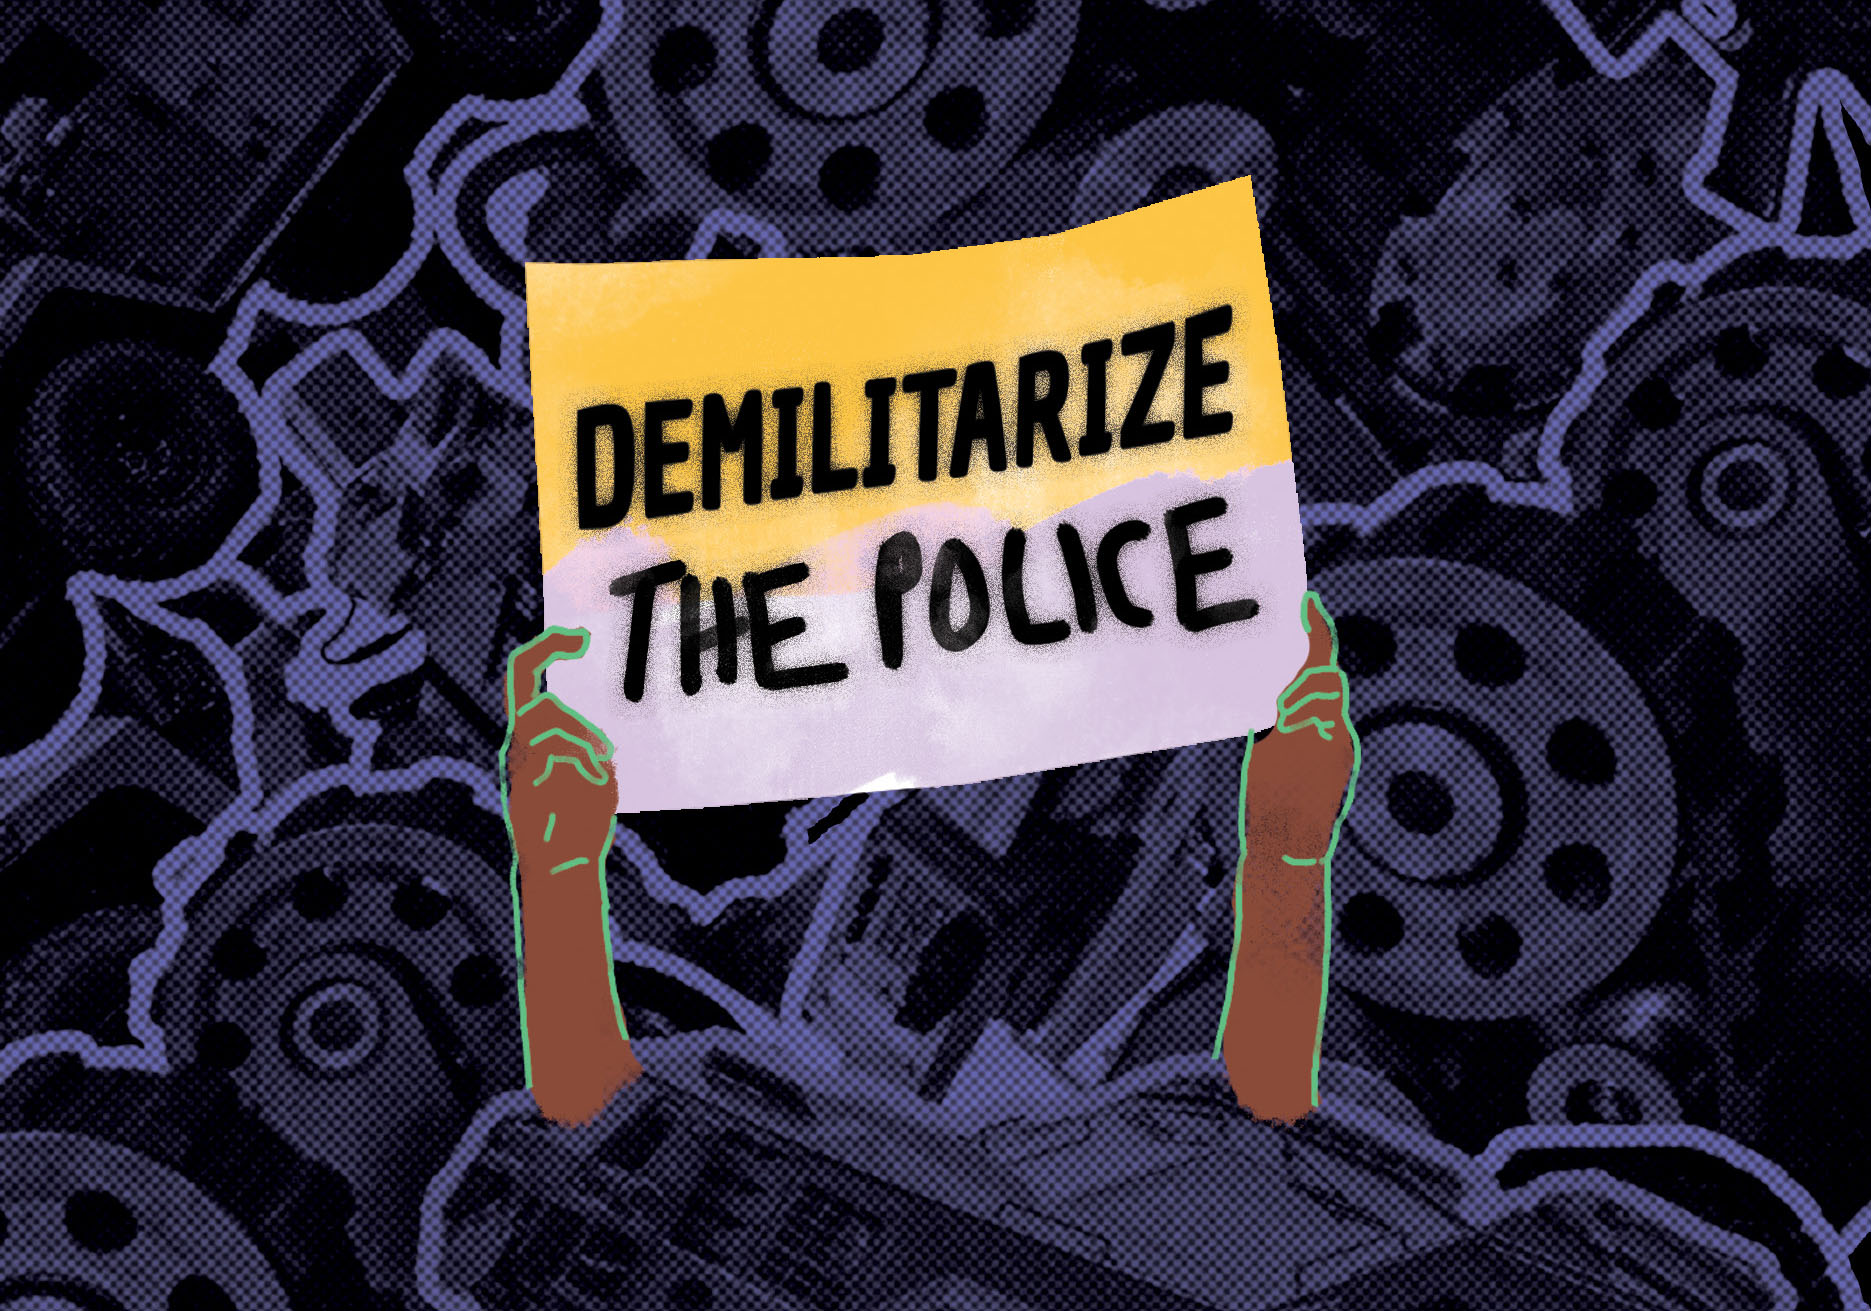 Stopping killer police robots and militarization